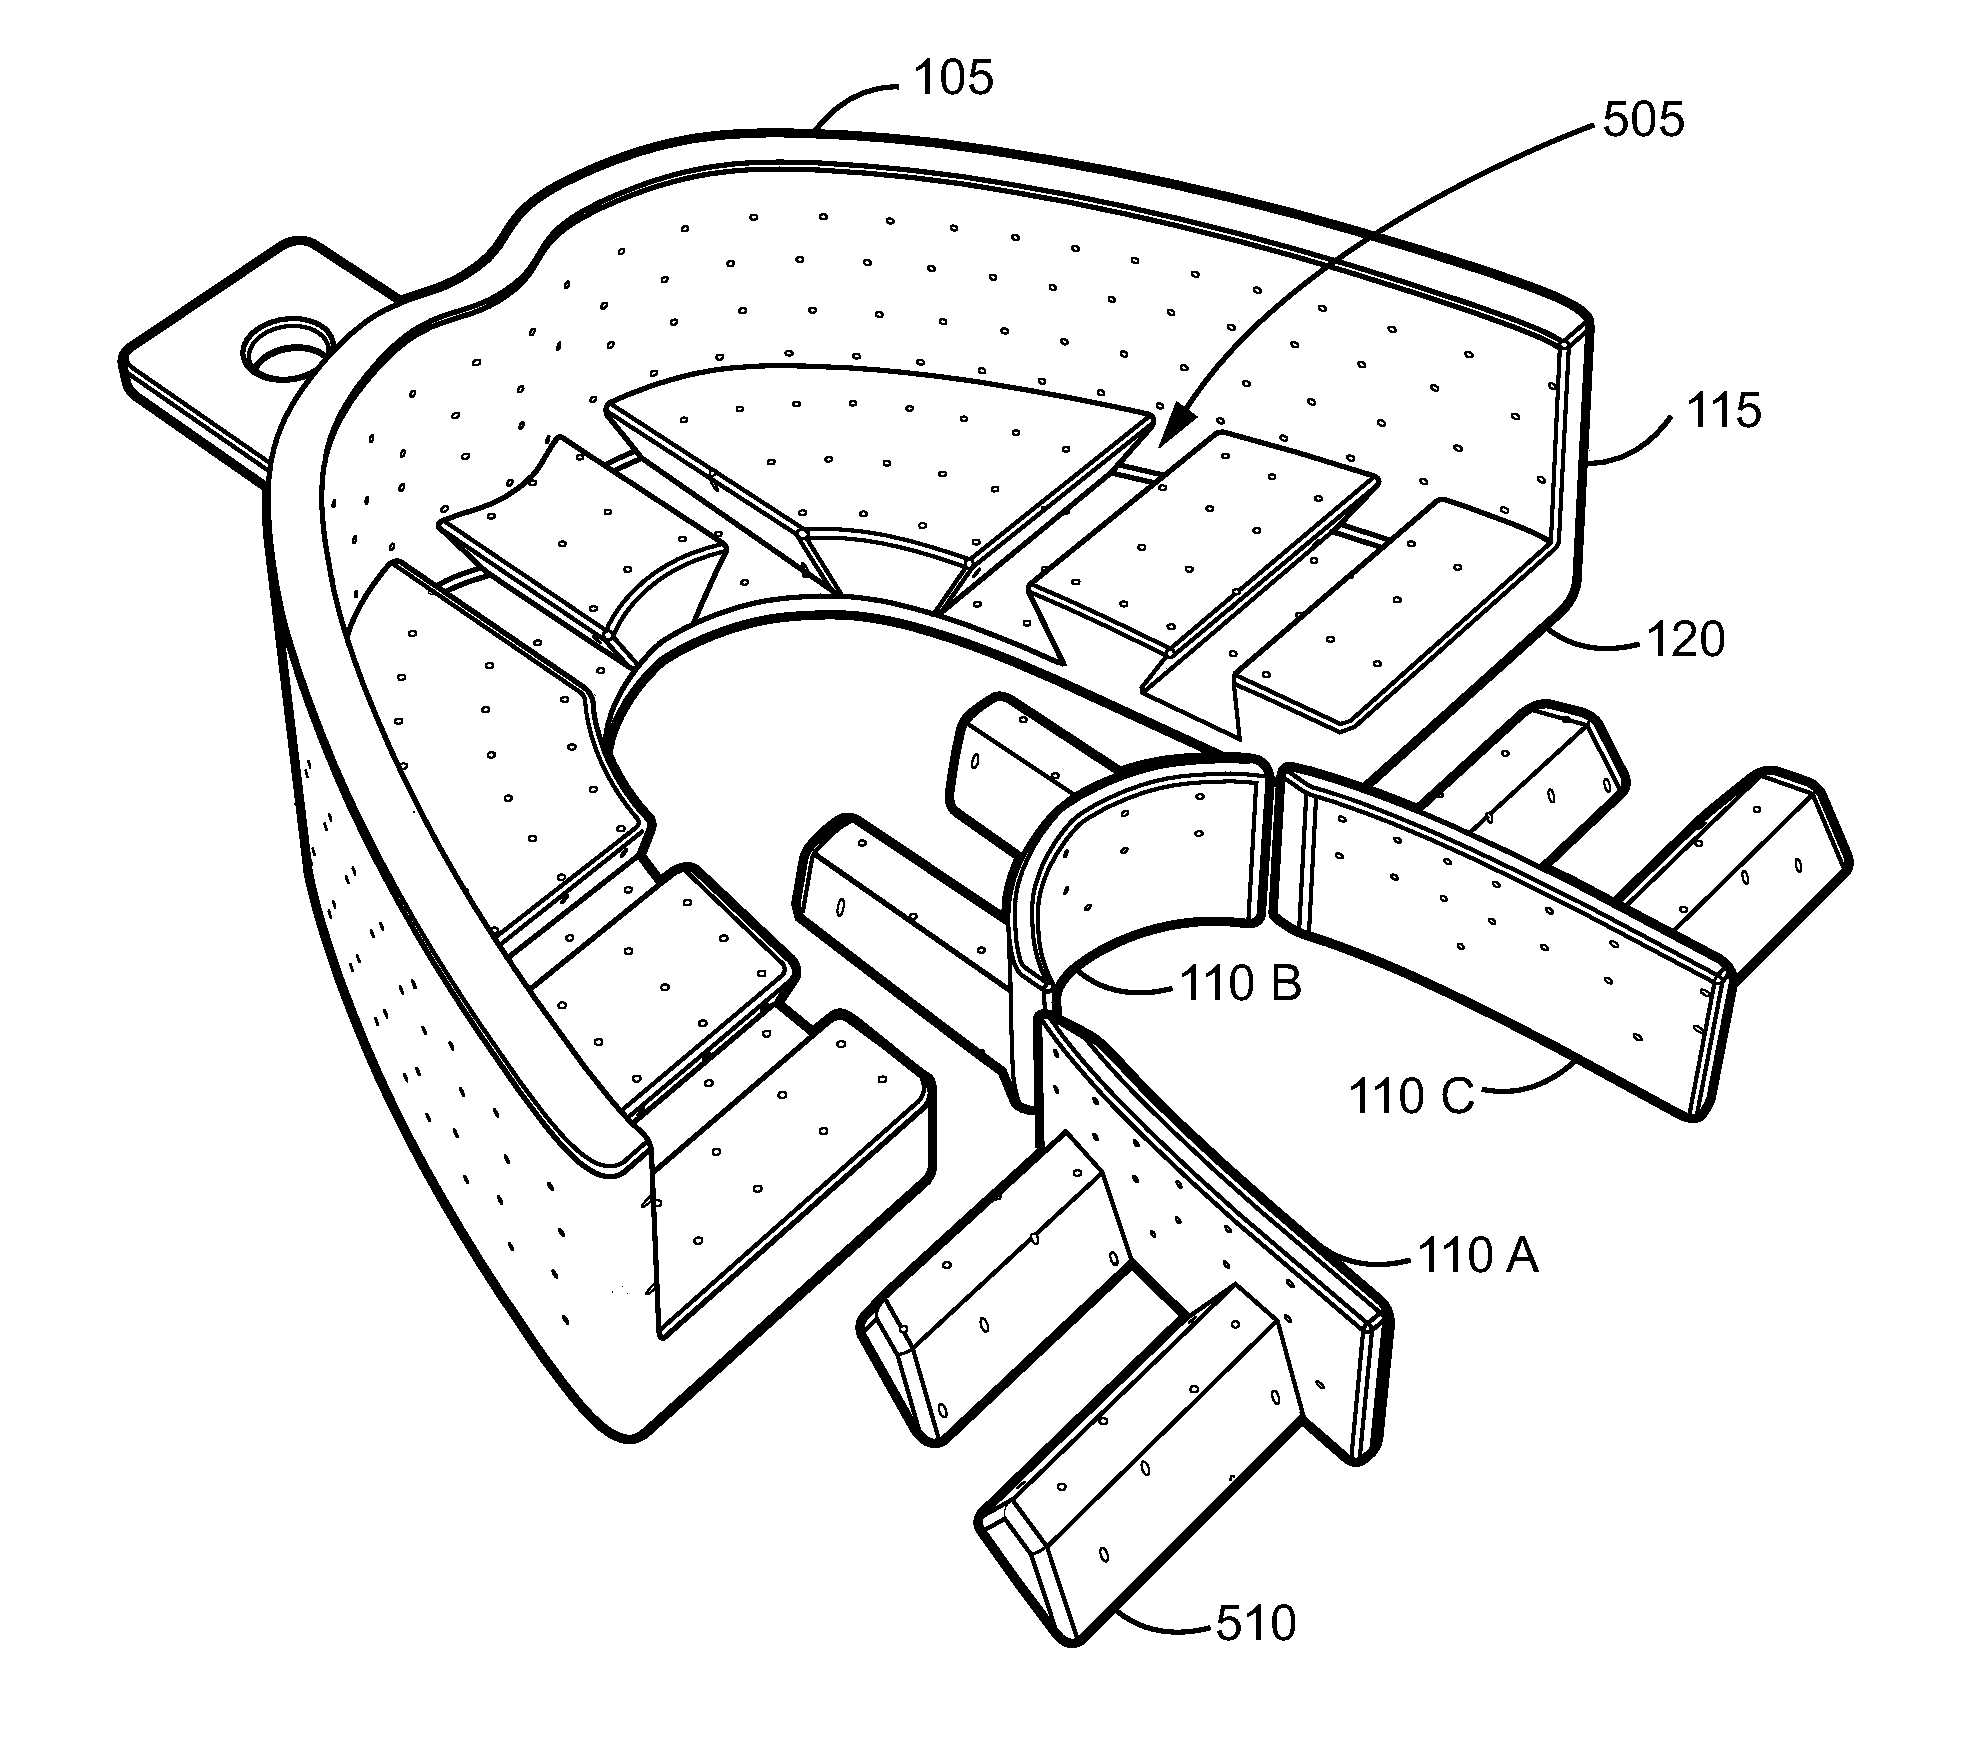 Dynamically adjustable dental impression devices and methods for using the same